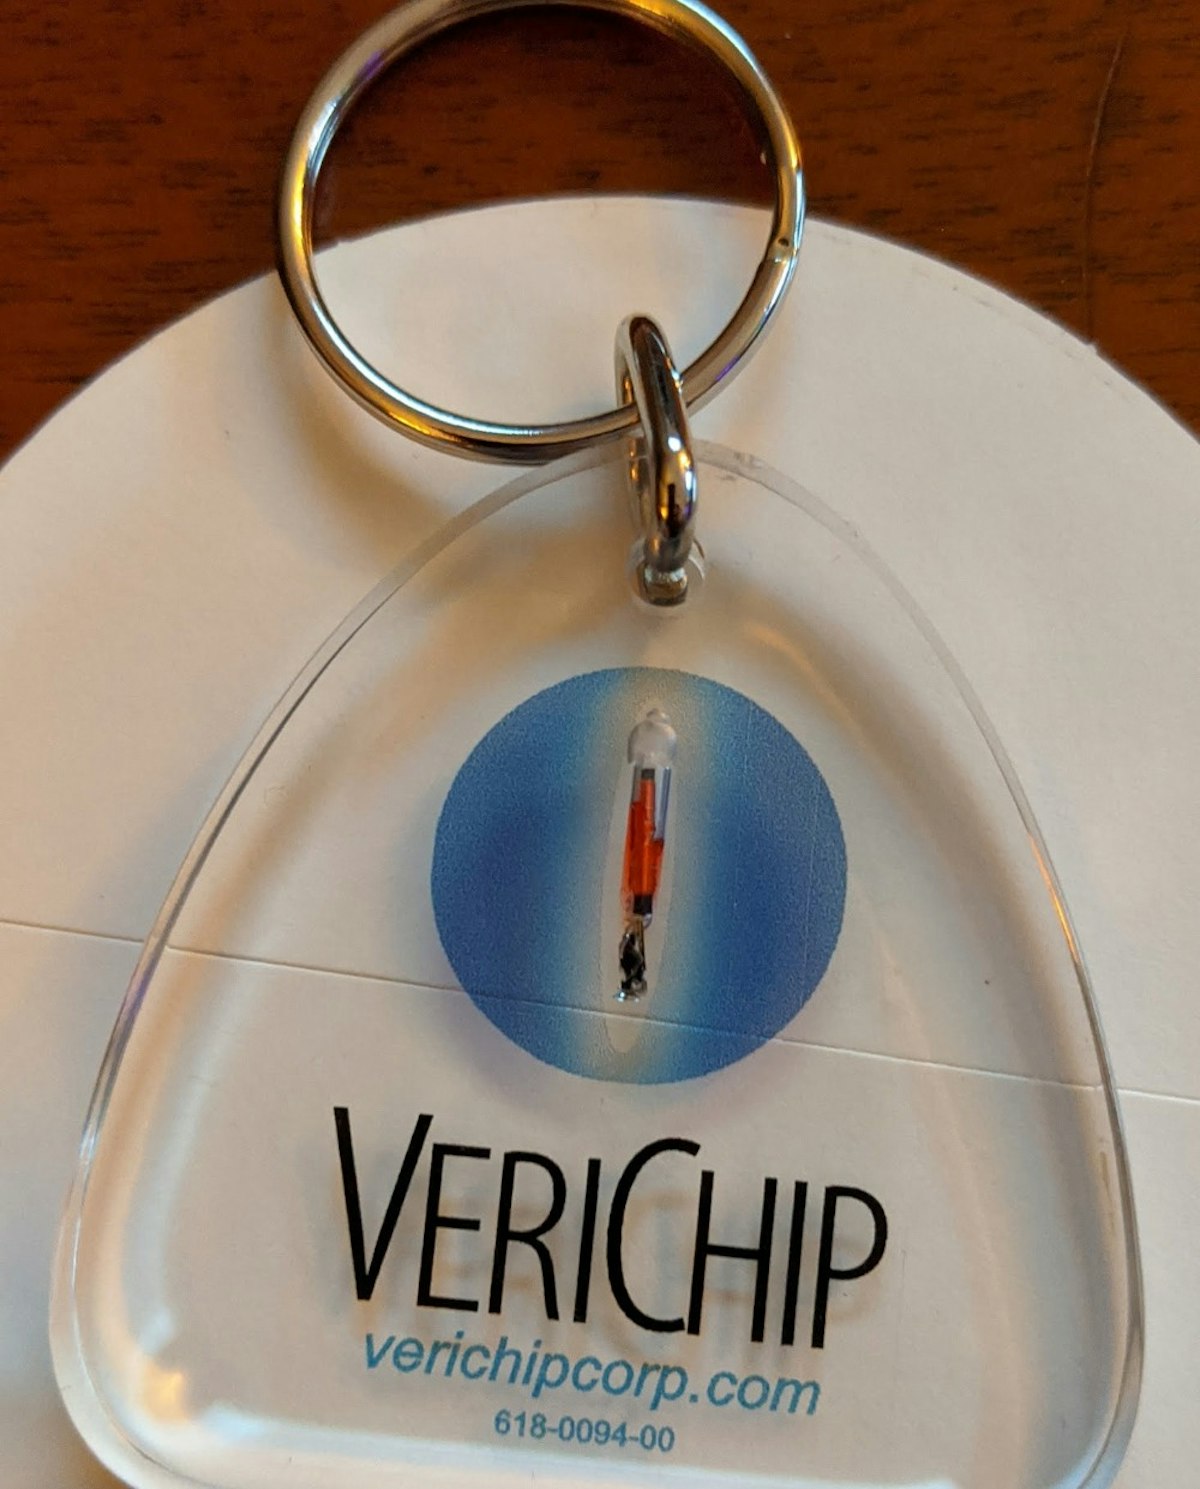 featured image - Chipping In: The Rise and Fall of VeriChip's Human Identification Implant